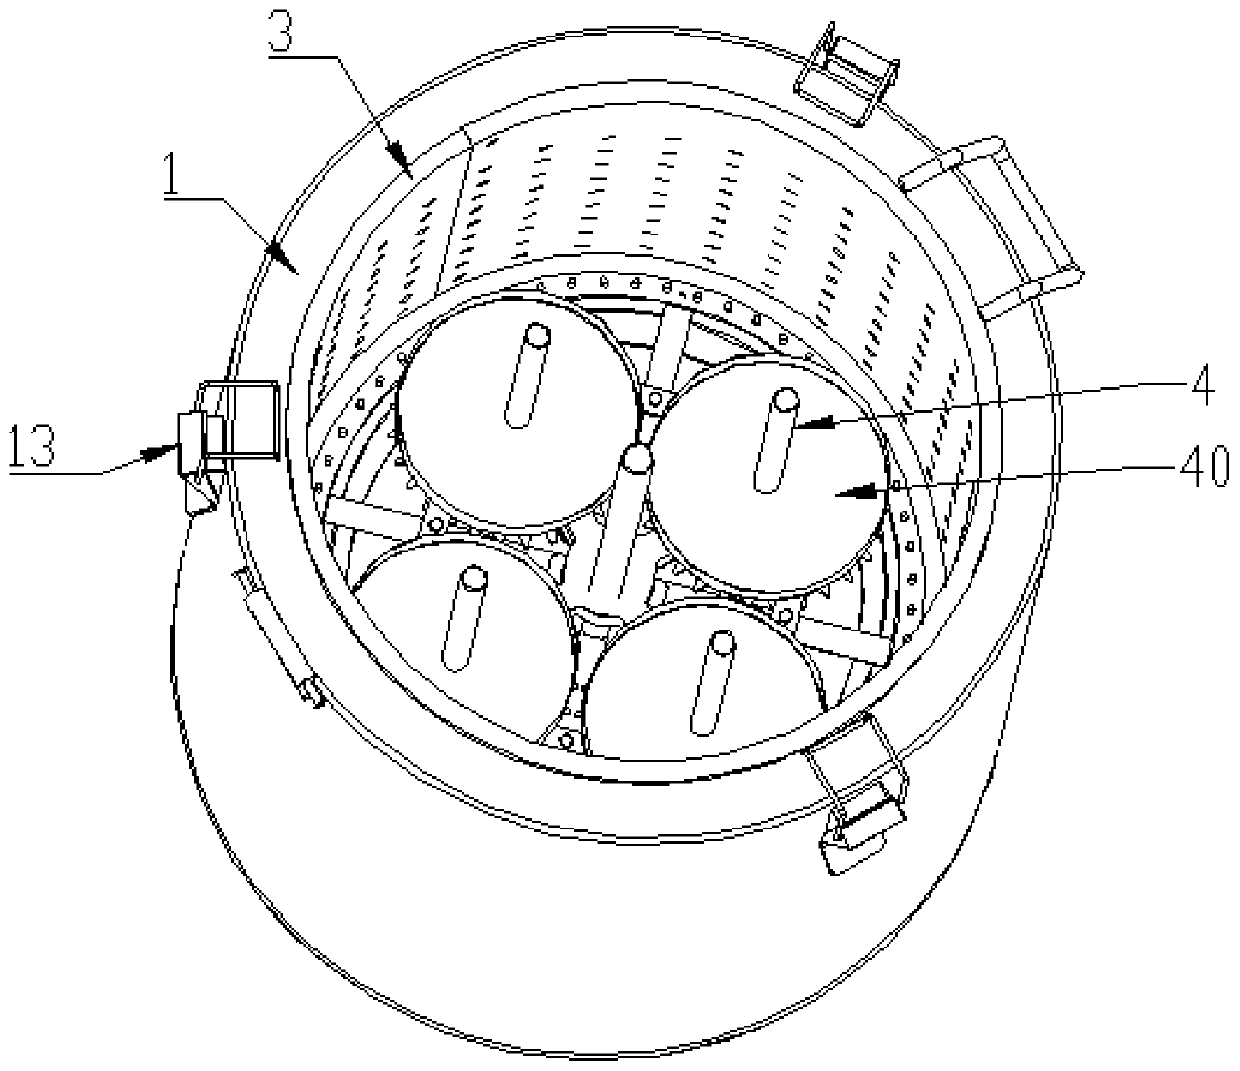 Oven with double rotating mechanisms